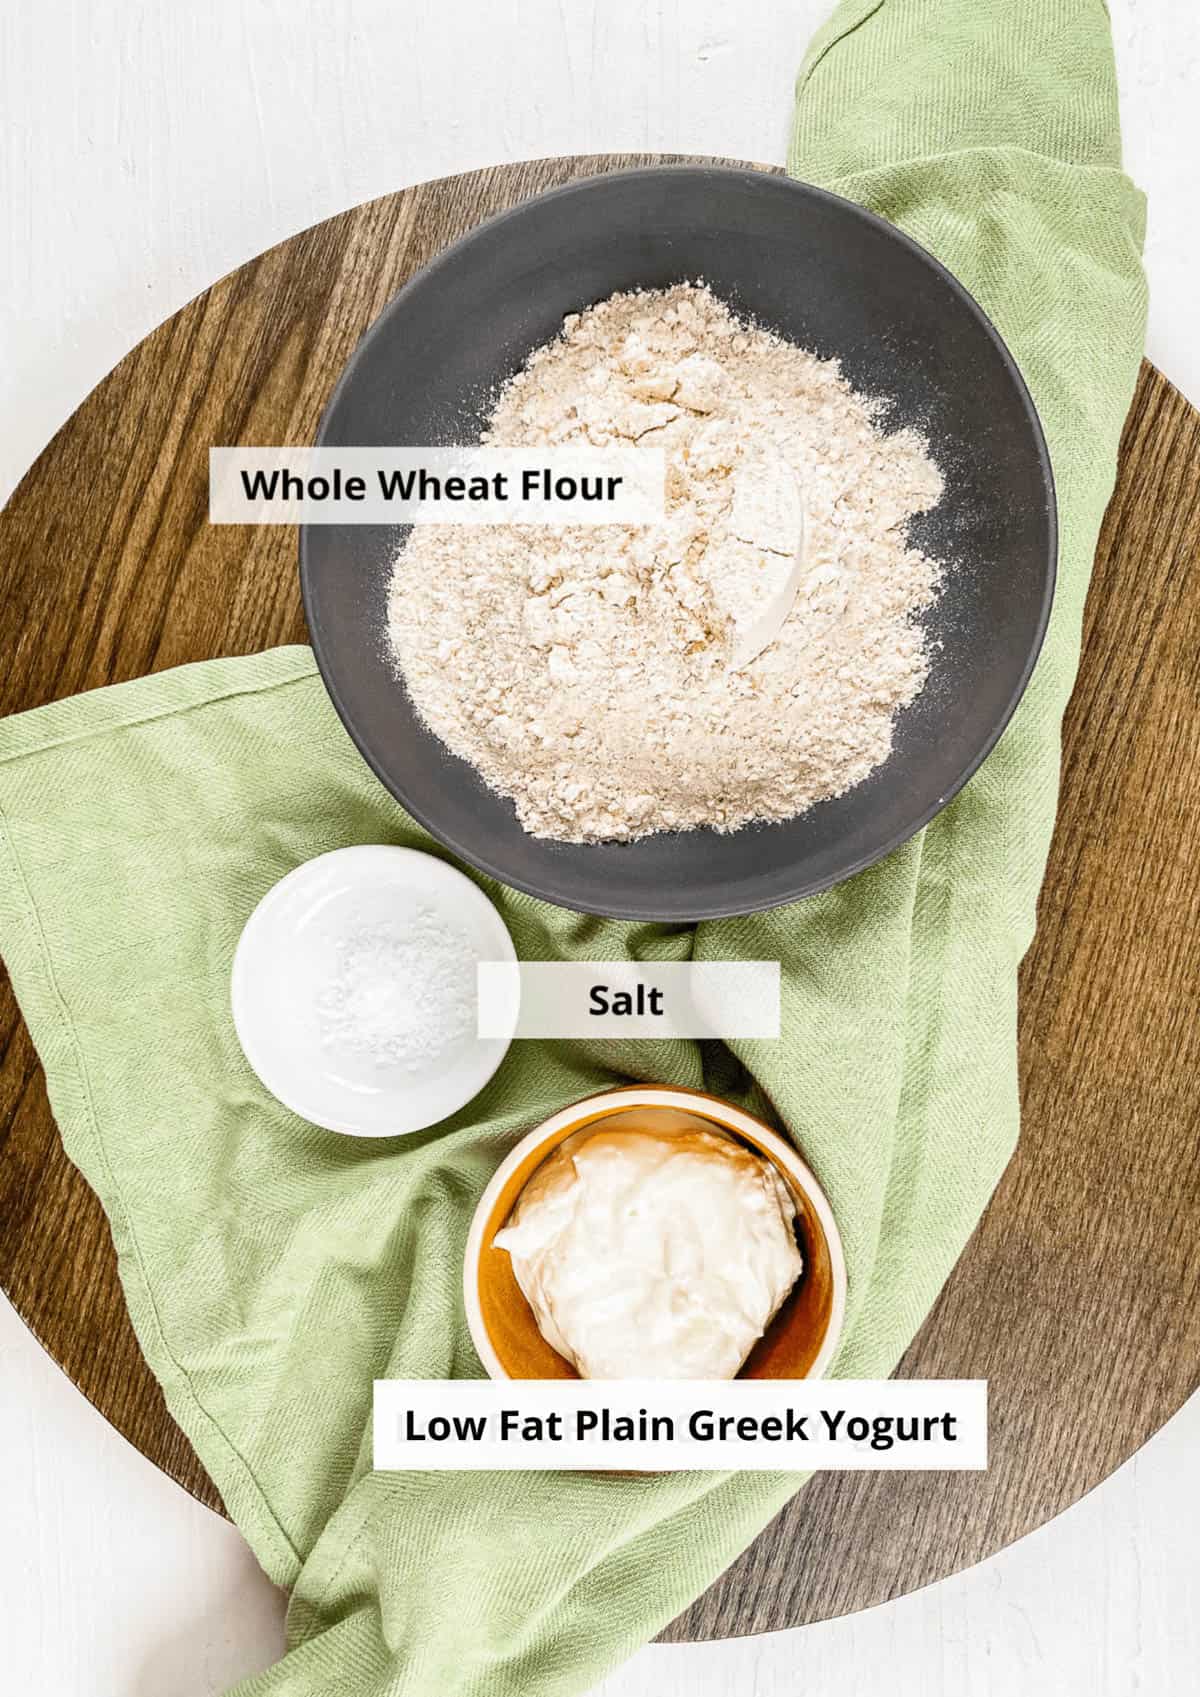 All of the ingredients for low-calorie pizza crust on a wooden cutting board with a napkin.